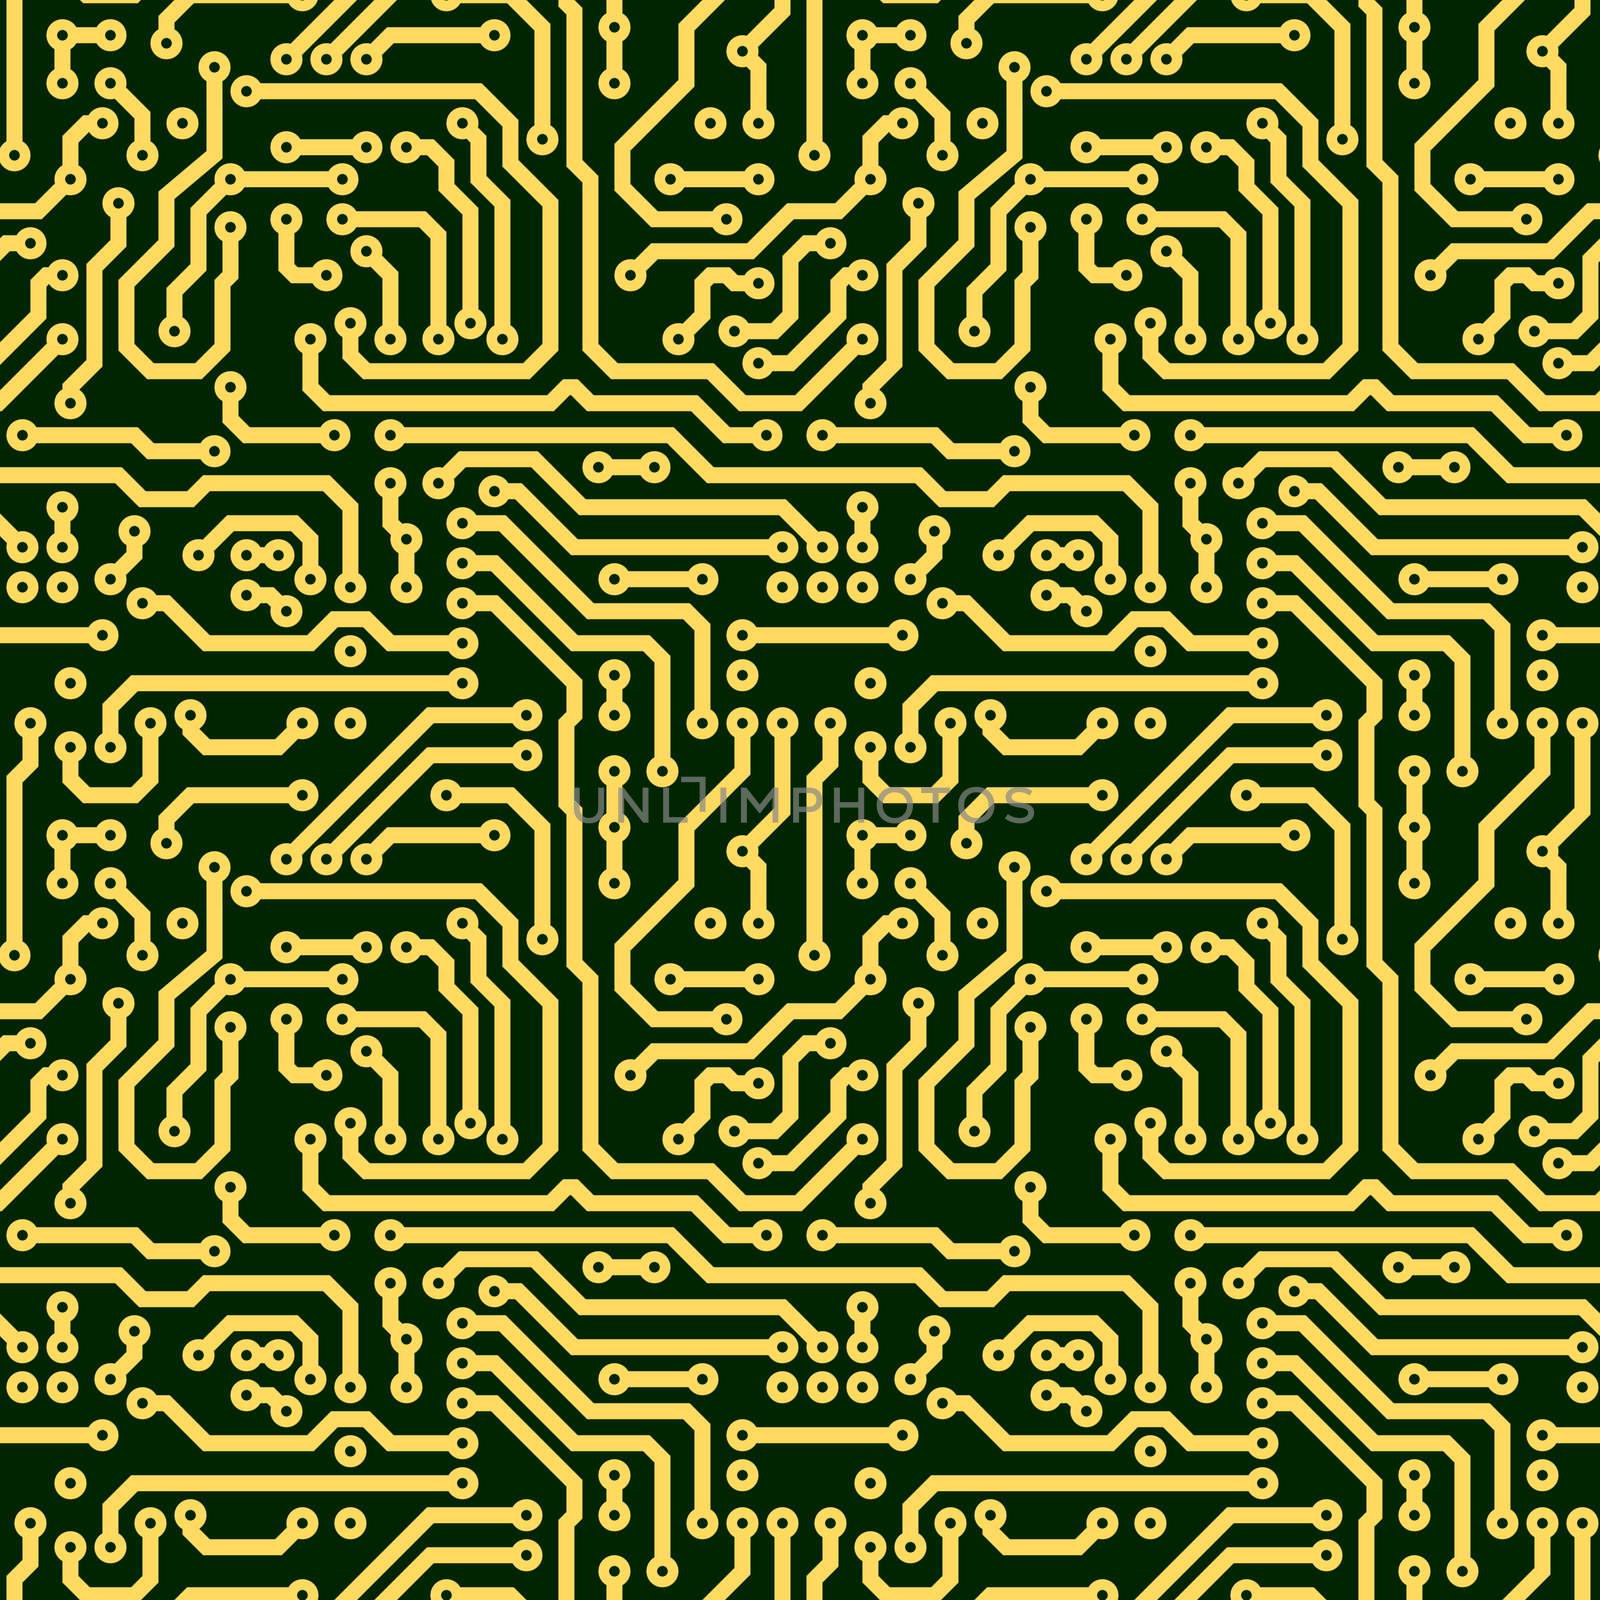 Abstract seamless texture - green electronic circuit board